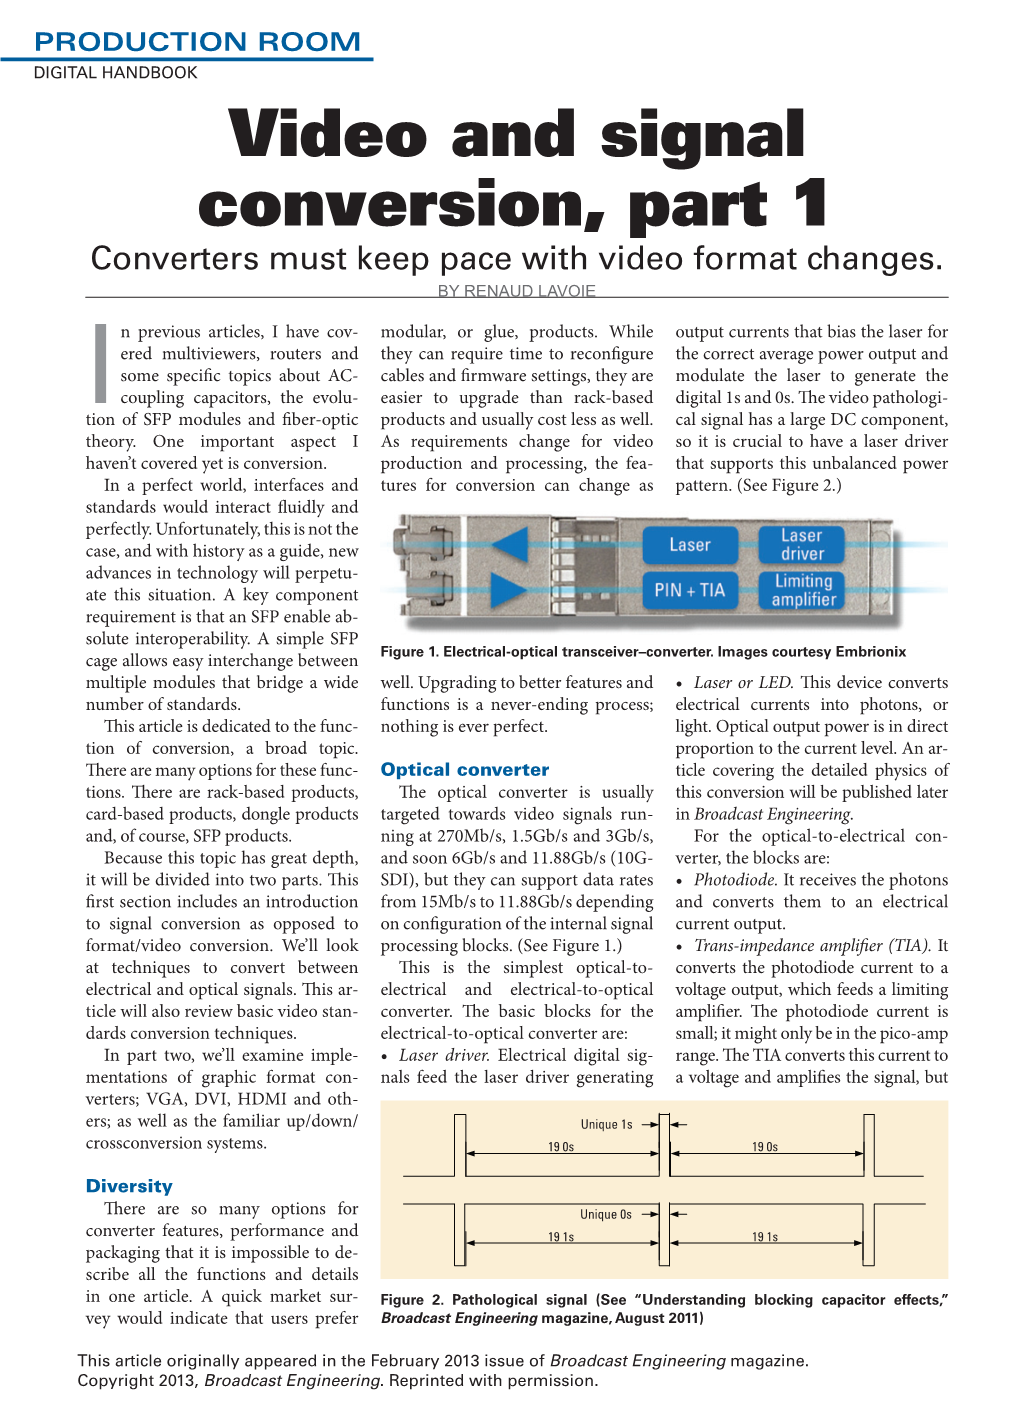 Video and Signal Conversion, Part 1 Converters Must Keep Pace with Video Format Changes